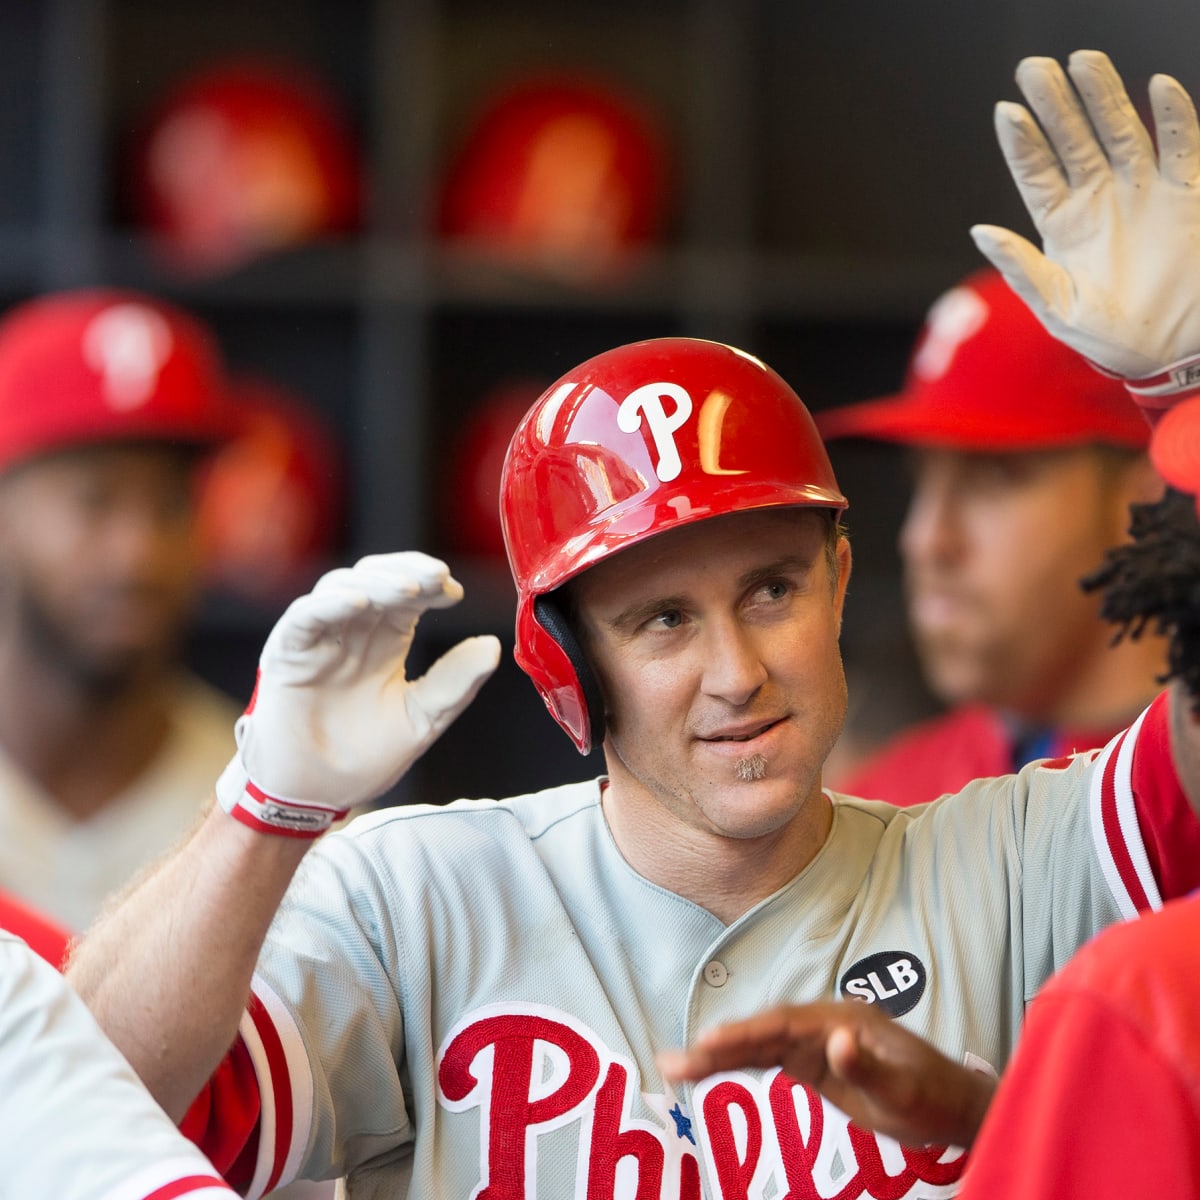 Chase Utley likely to remain with Philadelphia Phillies this